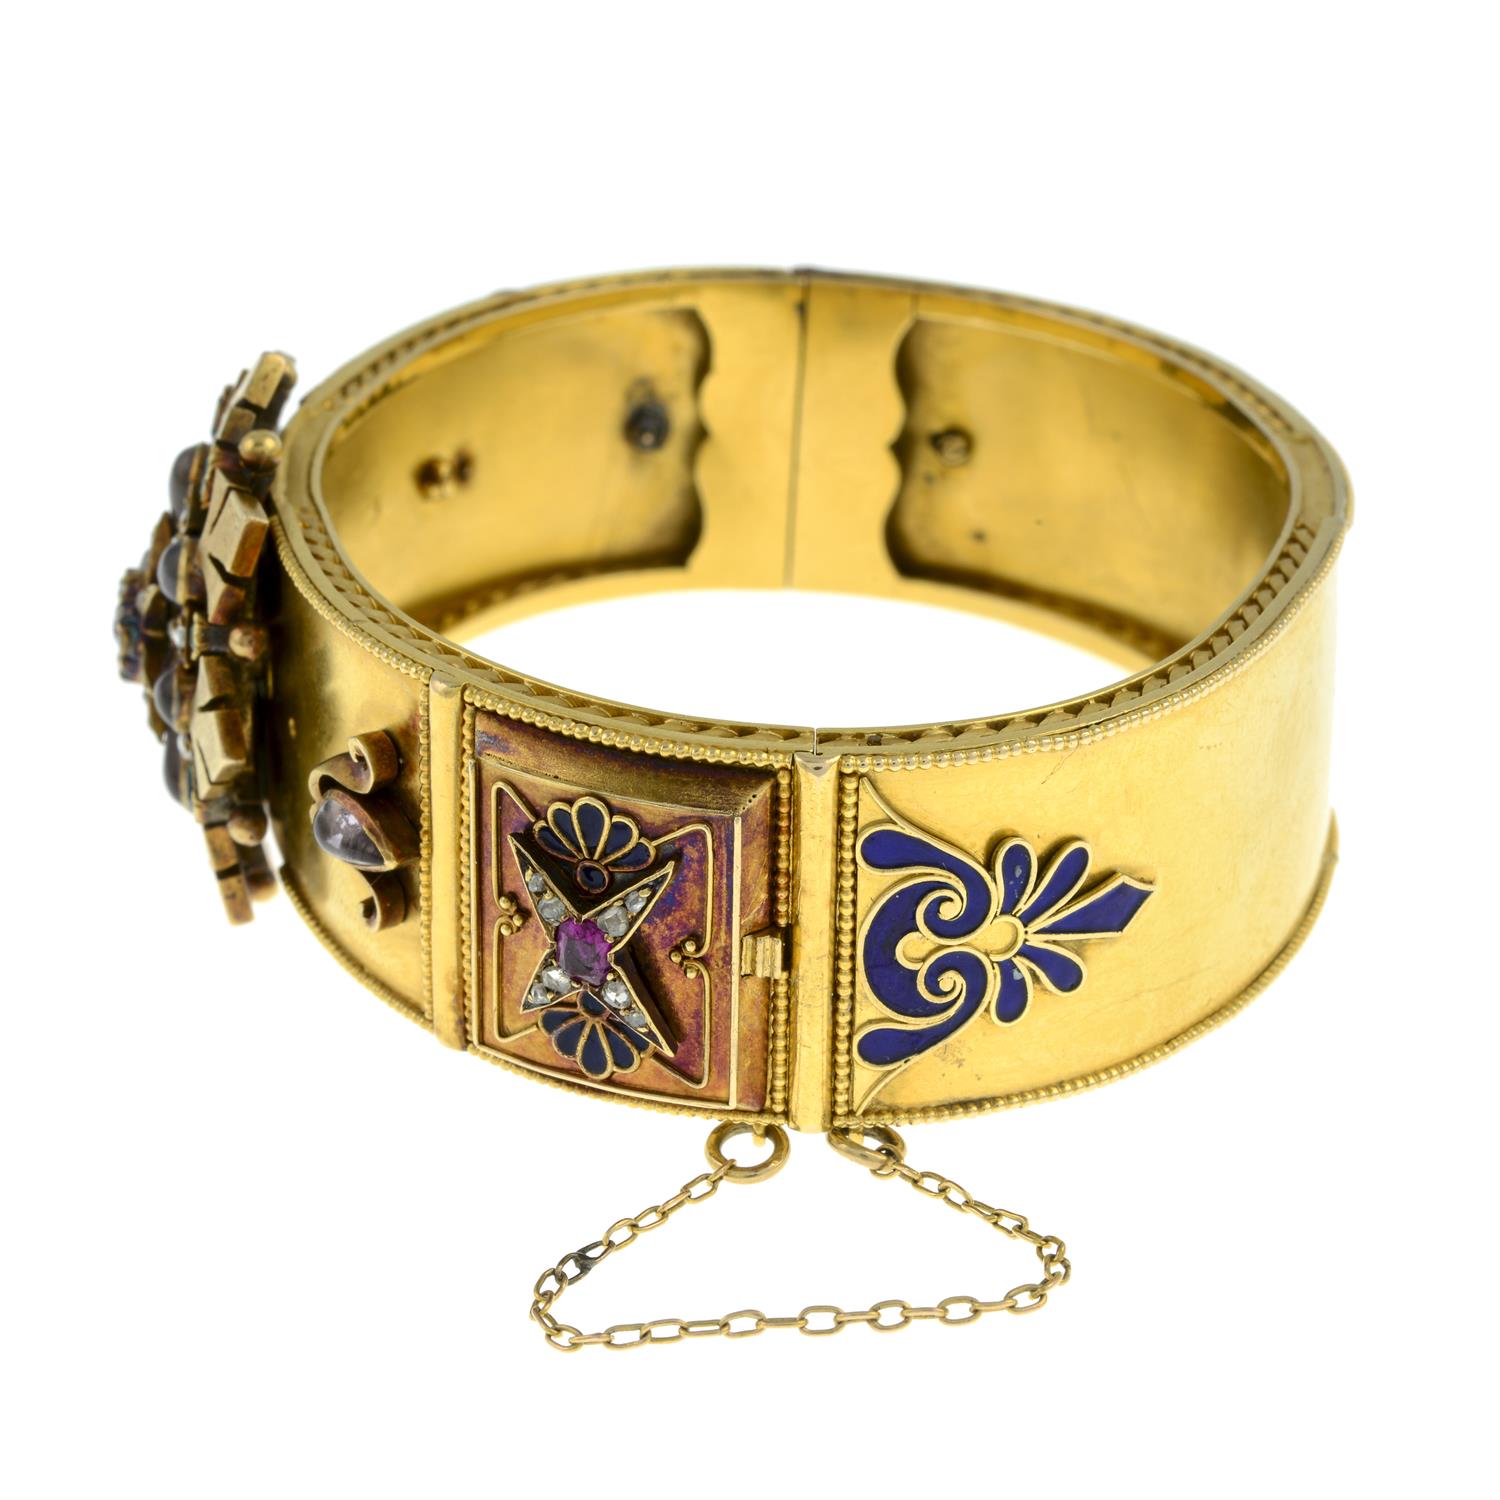 Gold gem and enamel bangle, by Carlo Giuliano - Image 4 of 5